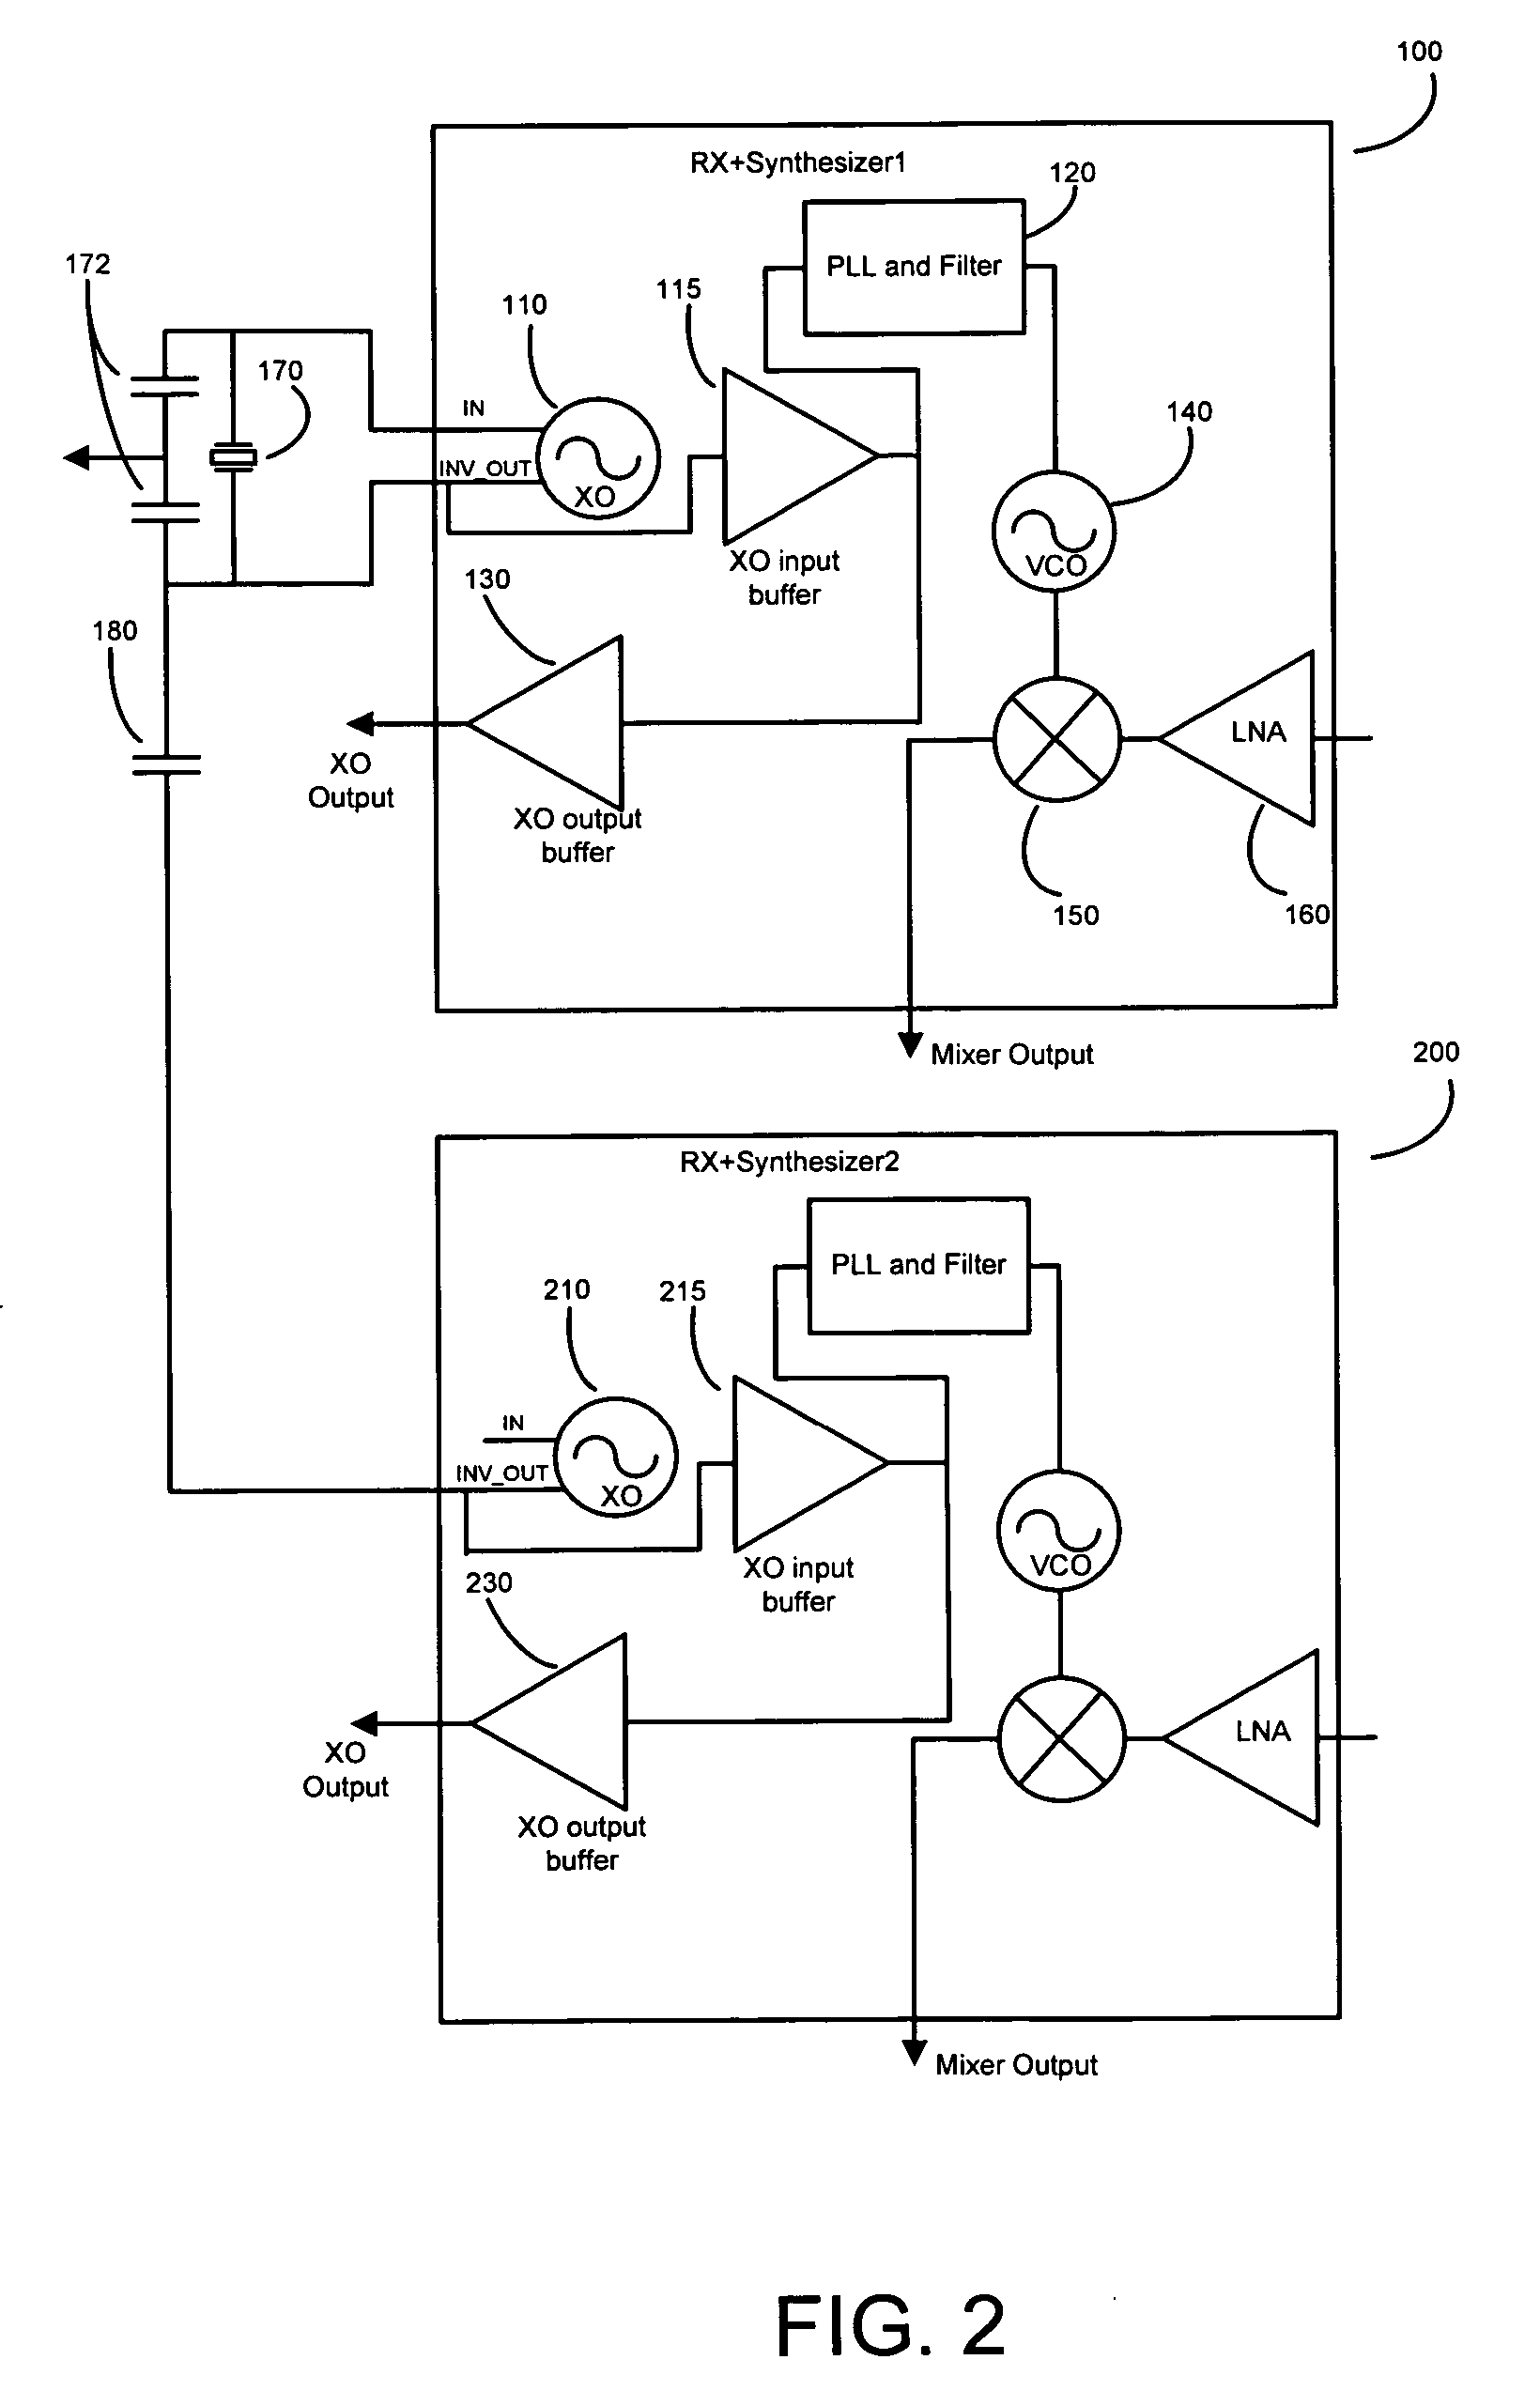 Oscillator coupling to reduce spurious signals in receiver circuits